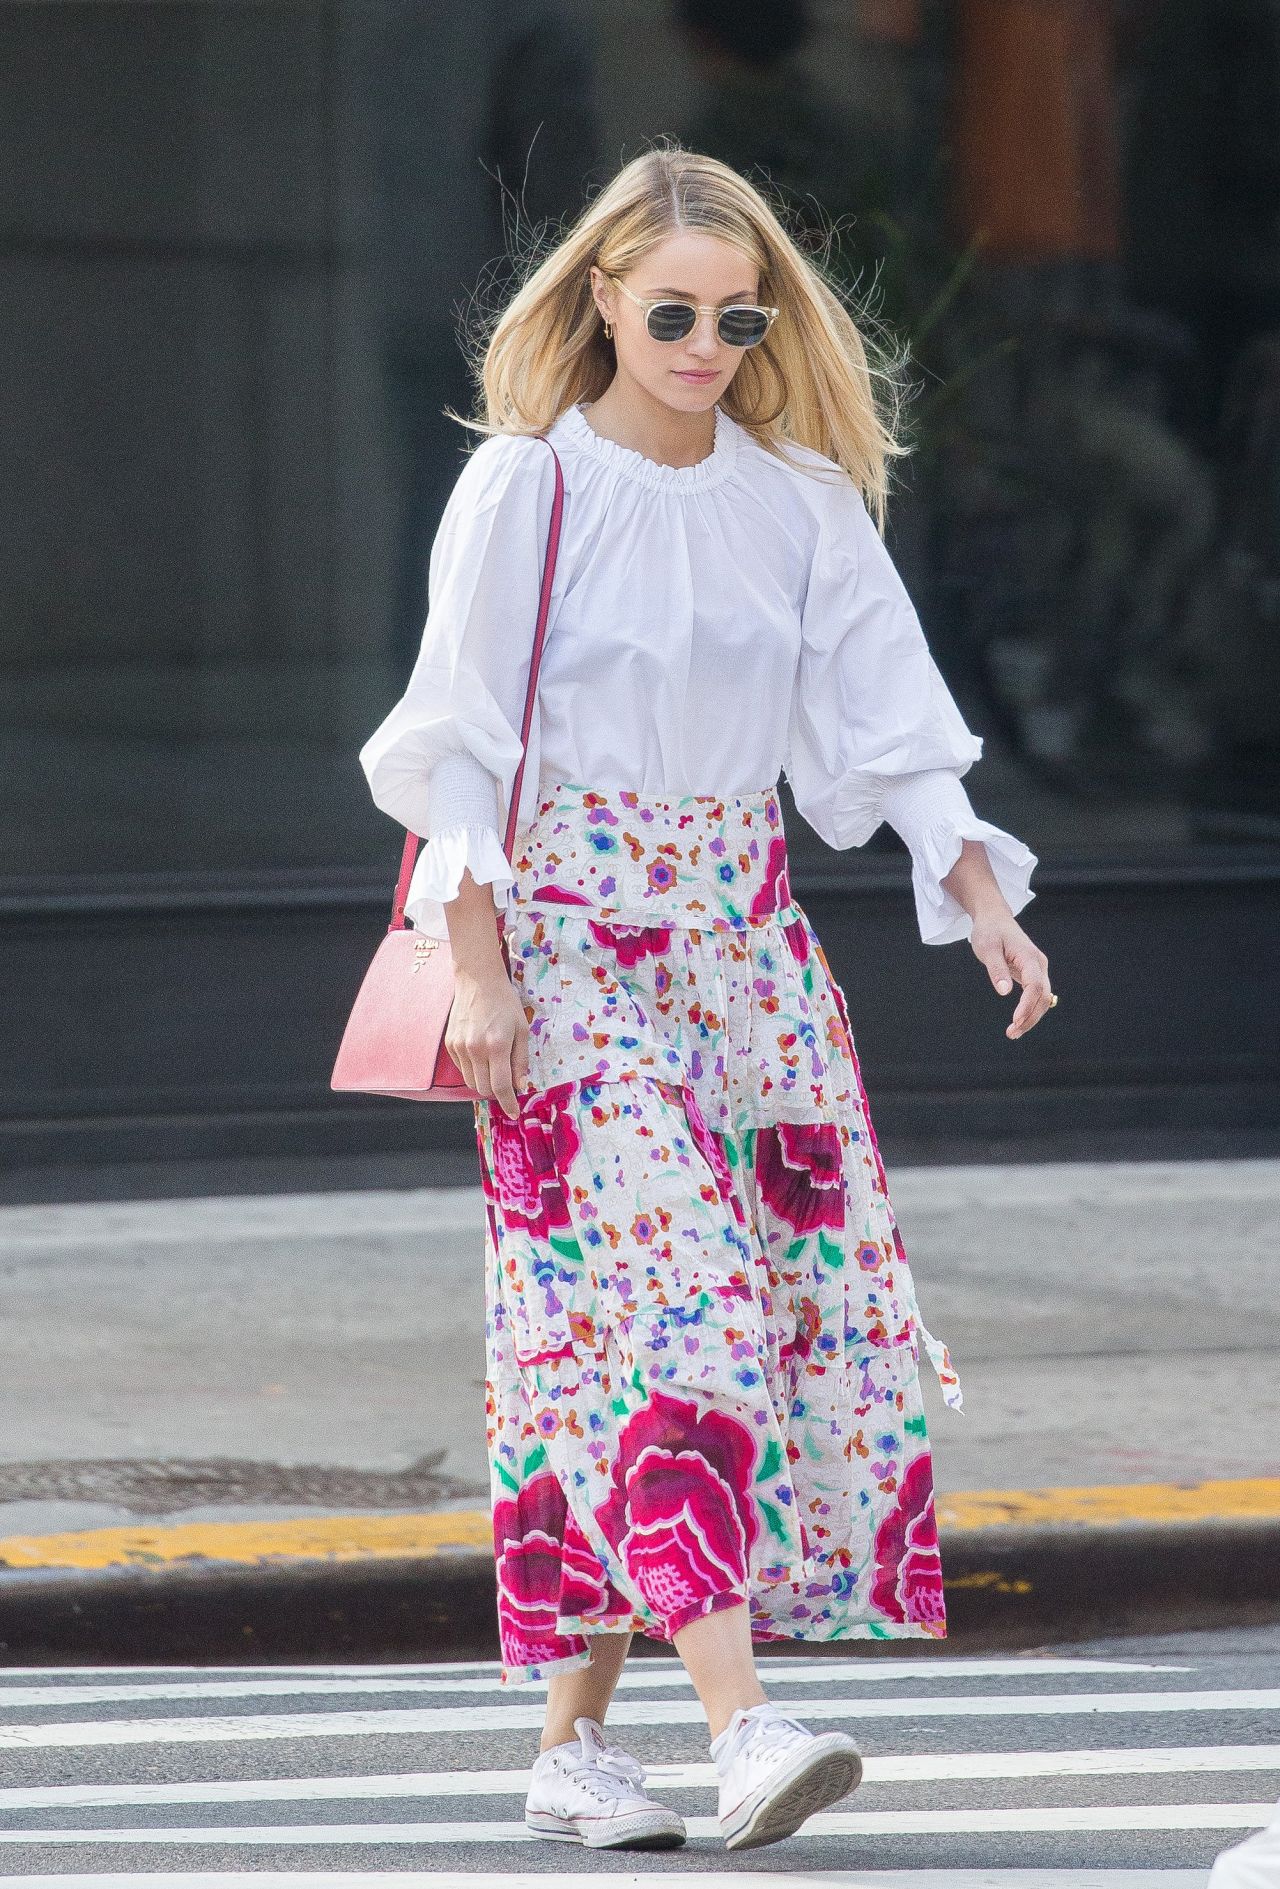 dianna-agron-in-a-white-blouse-and-long-floral-skirt-soho-in-new-york-04-13-2018-8.jpg